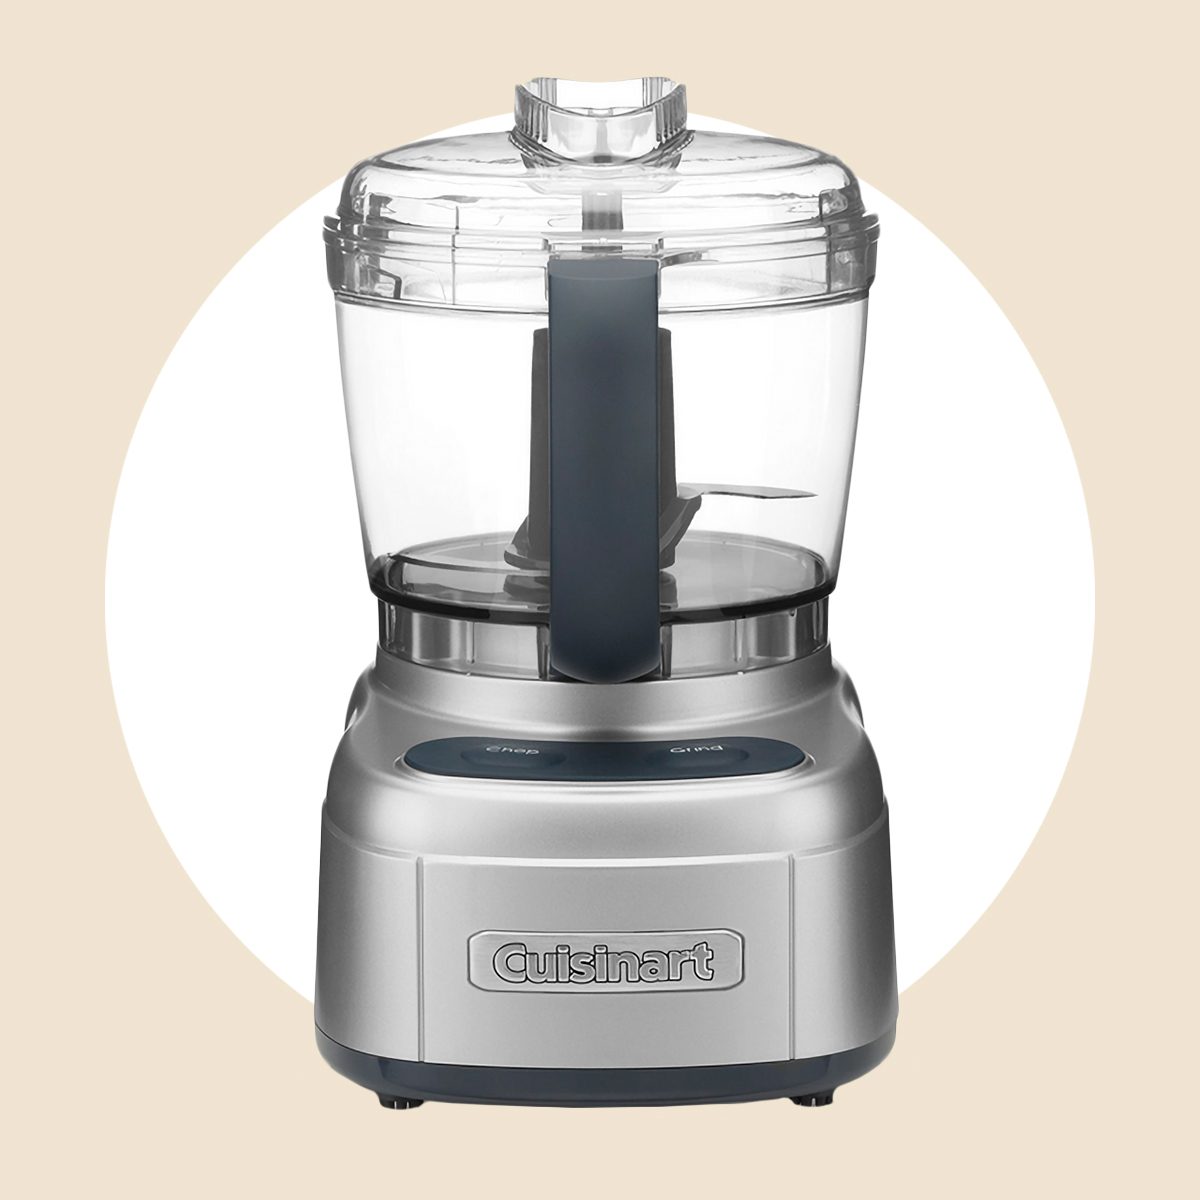 The Best Mini Food Processor Models According to Our Kitchen Experts